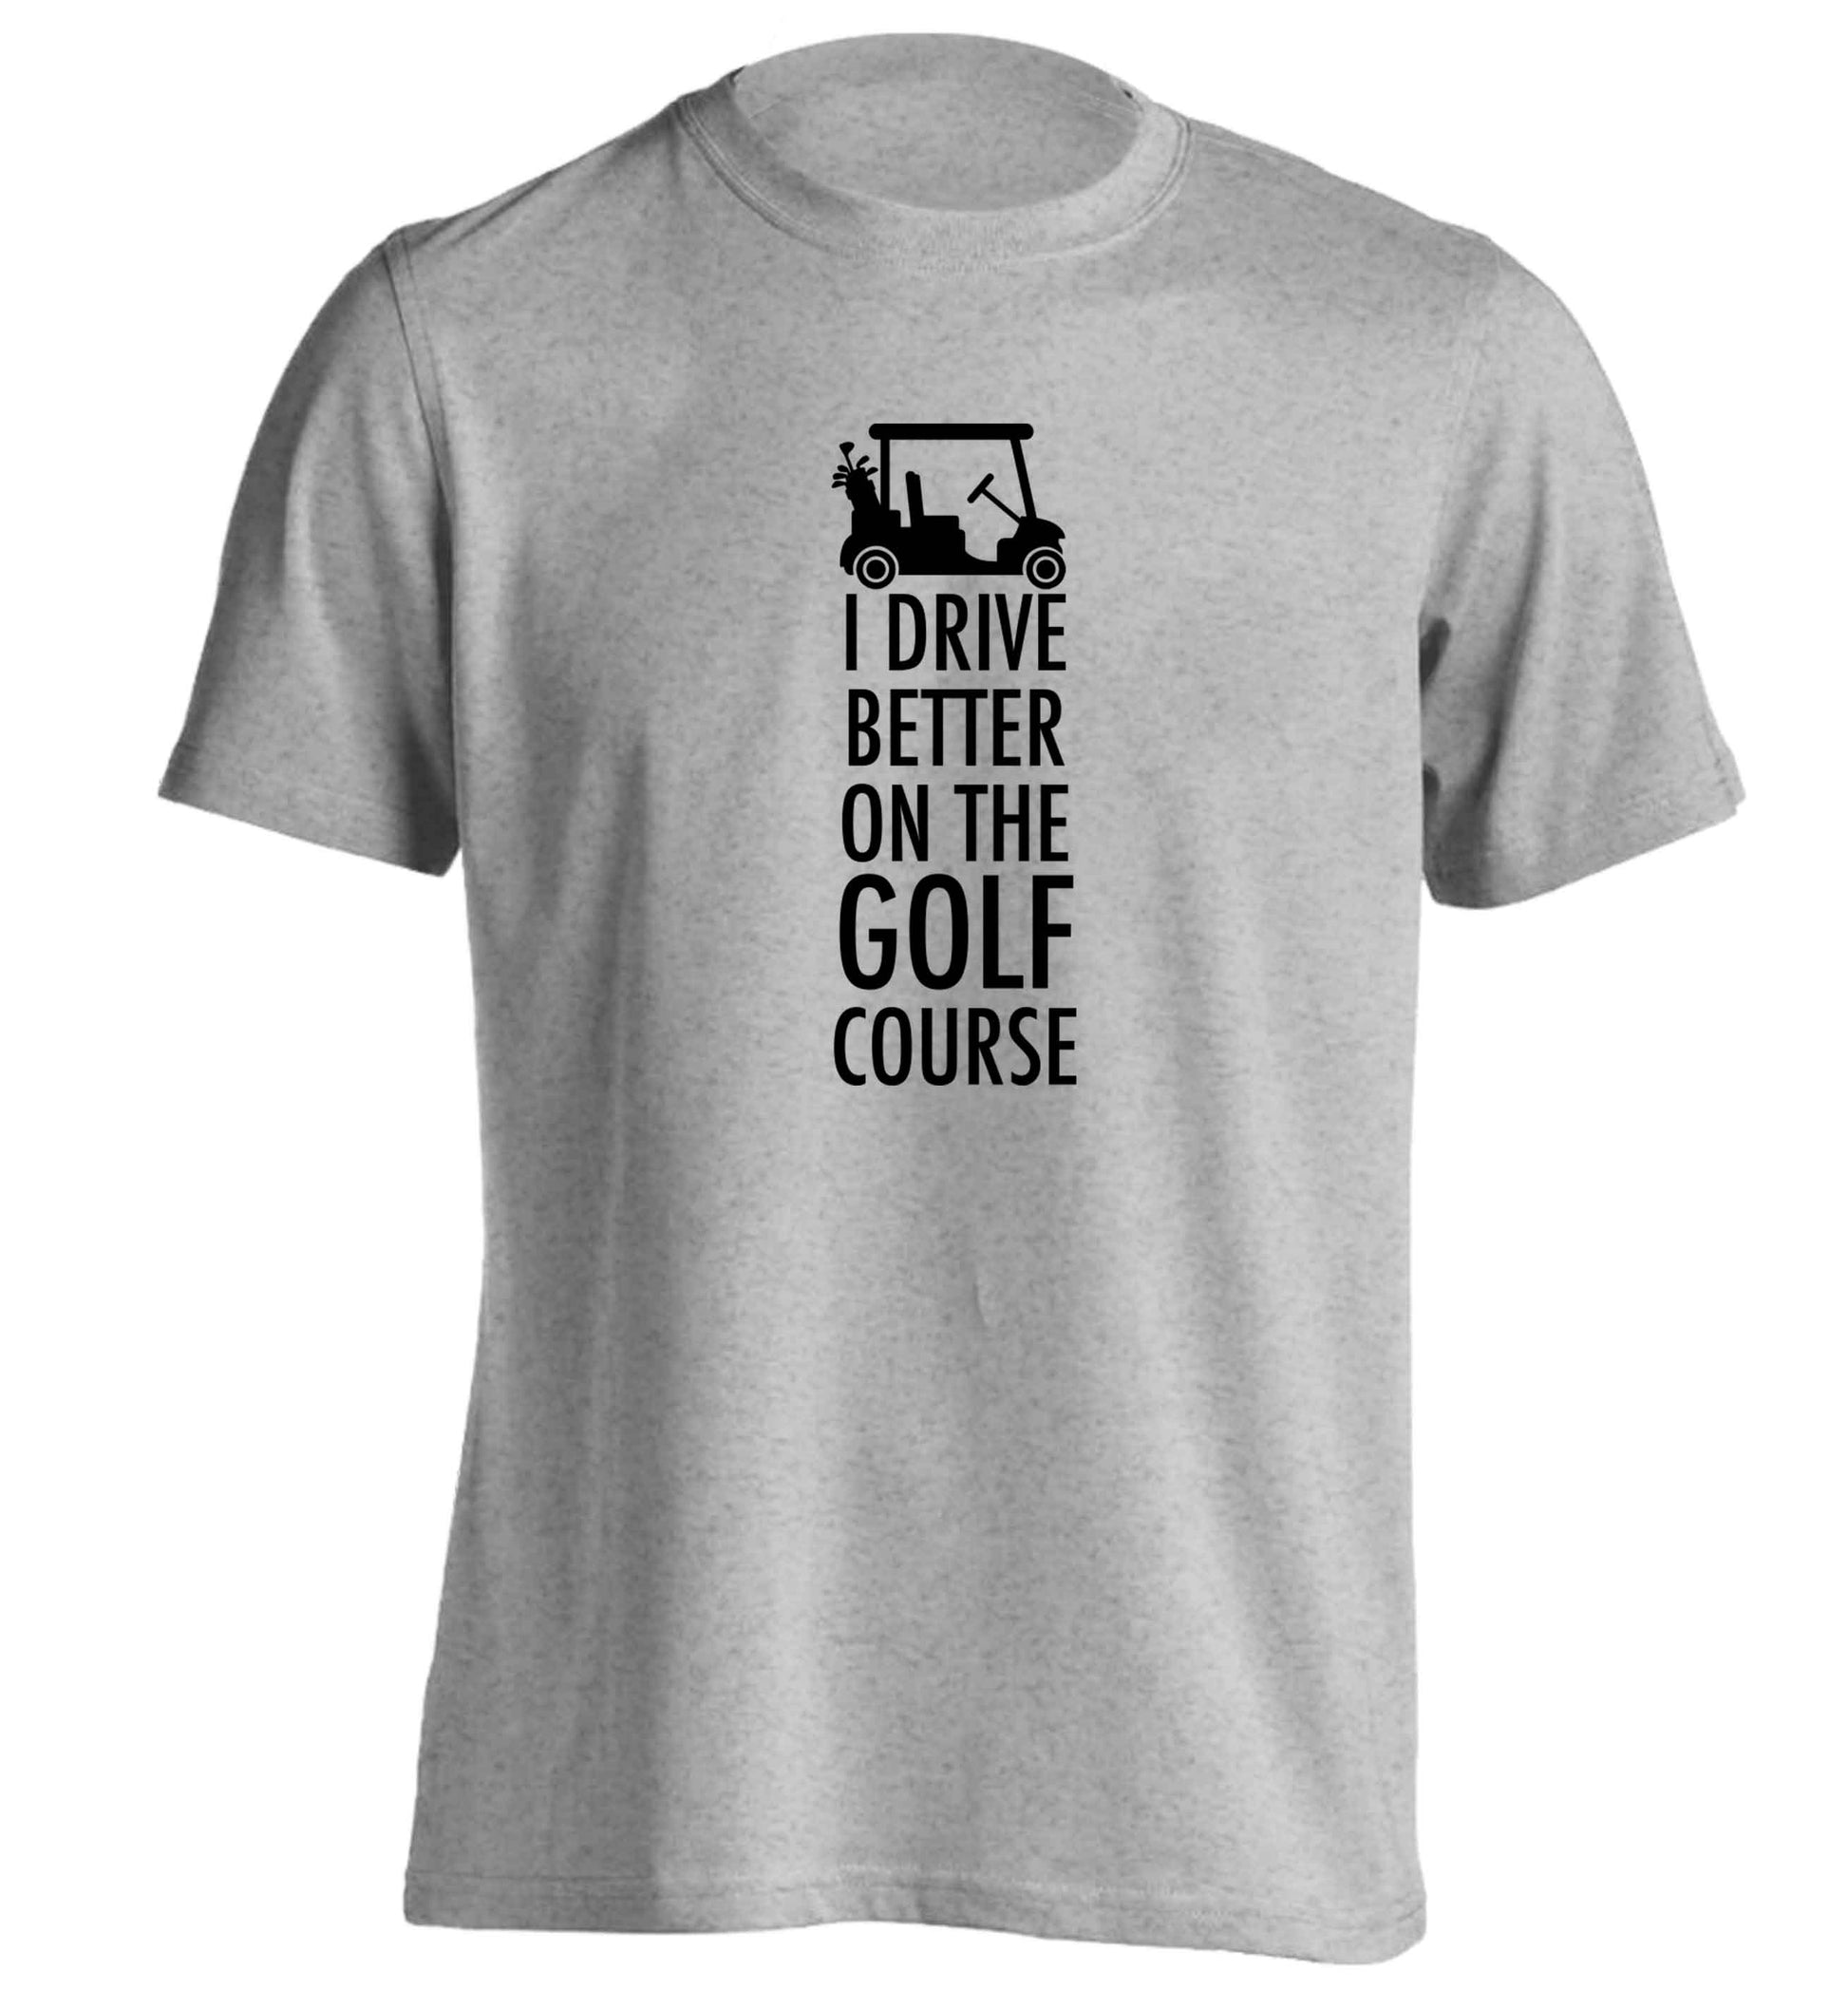 I drive better on the golf course adults unisex grey Tshirt 2XL